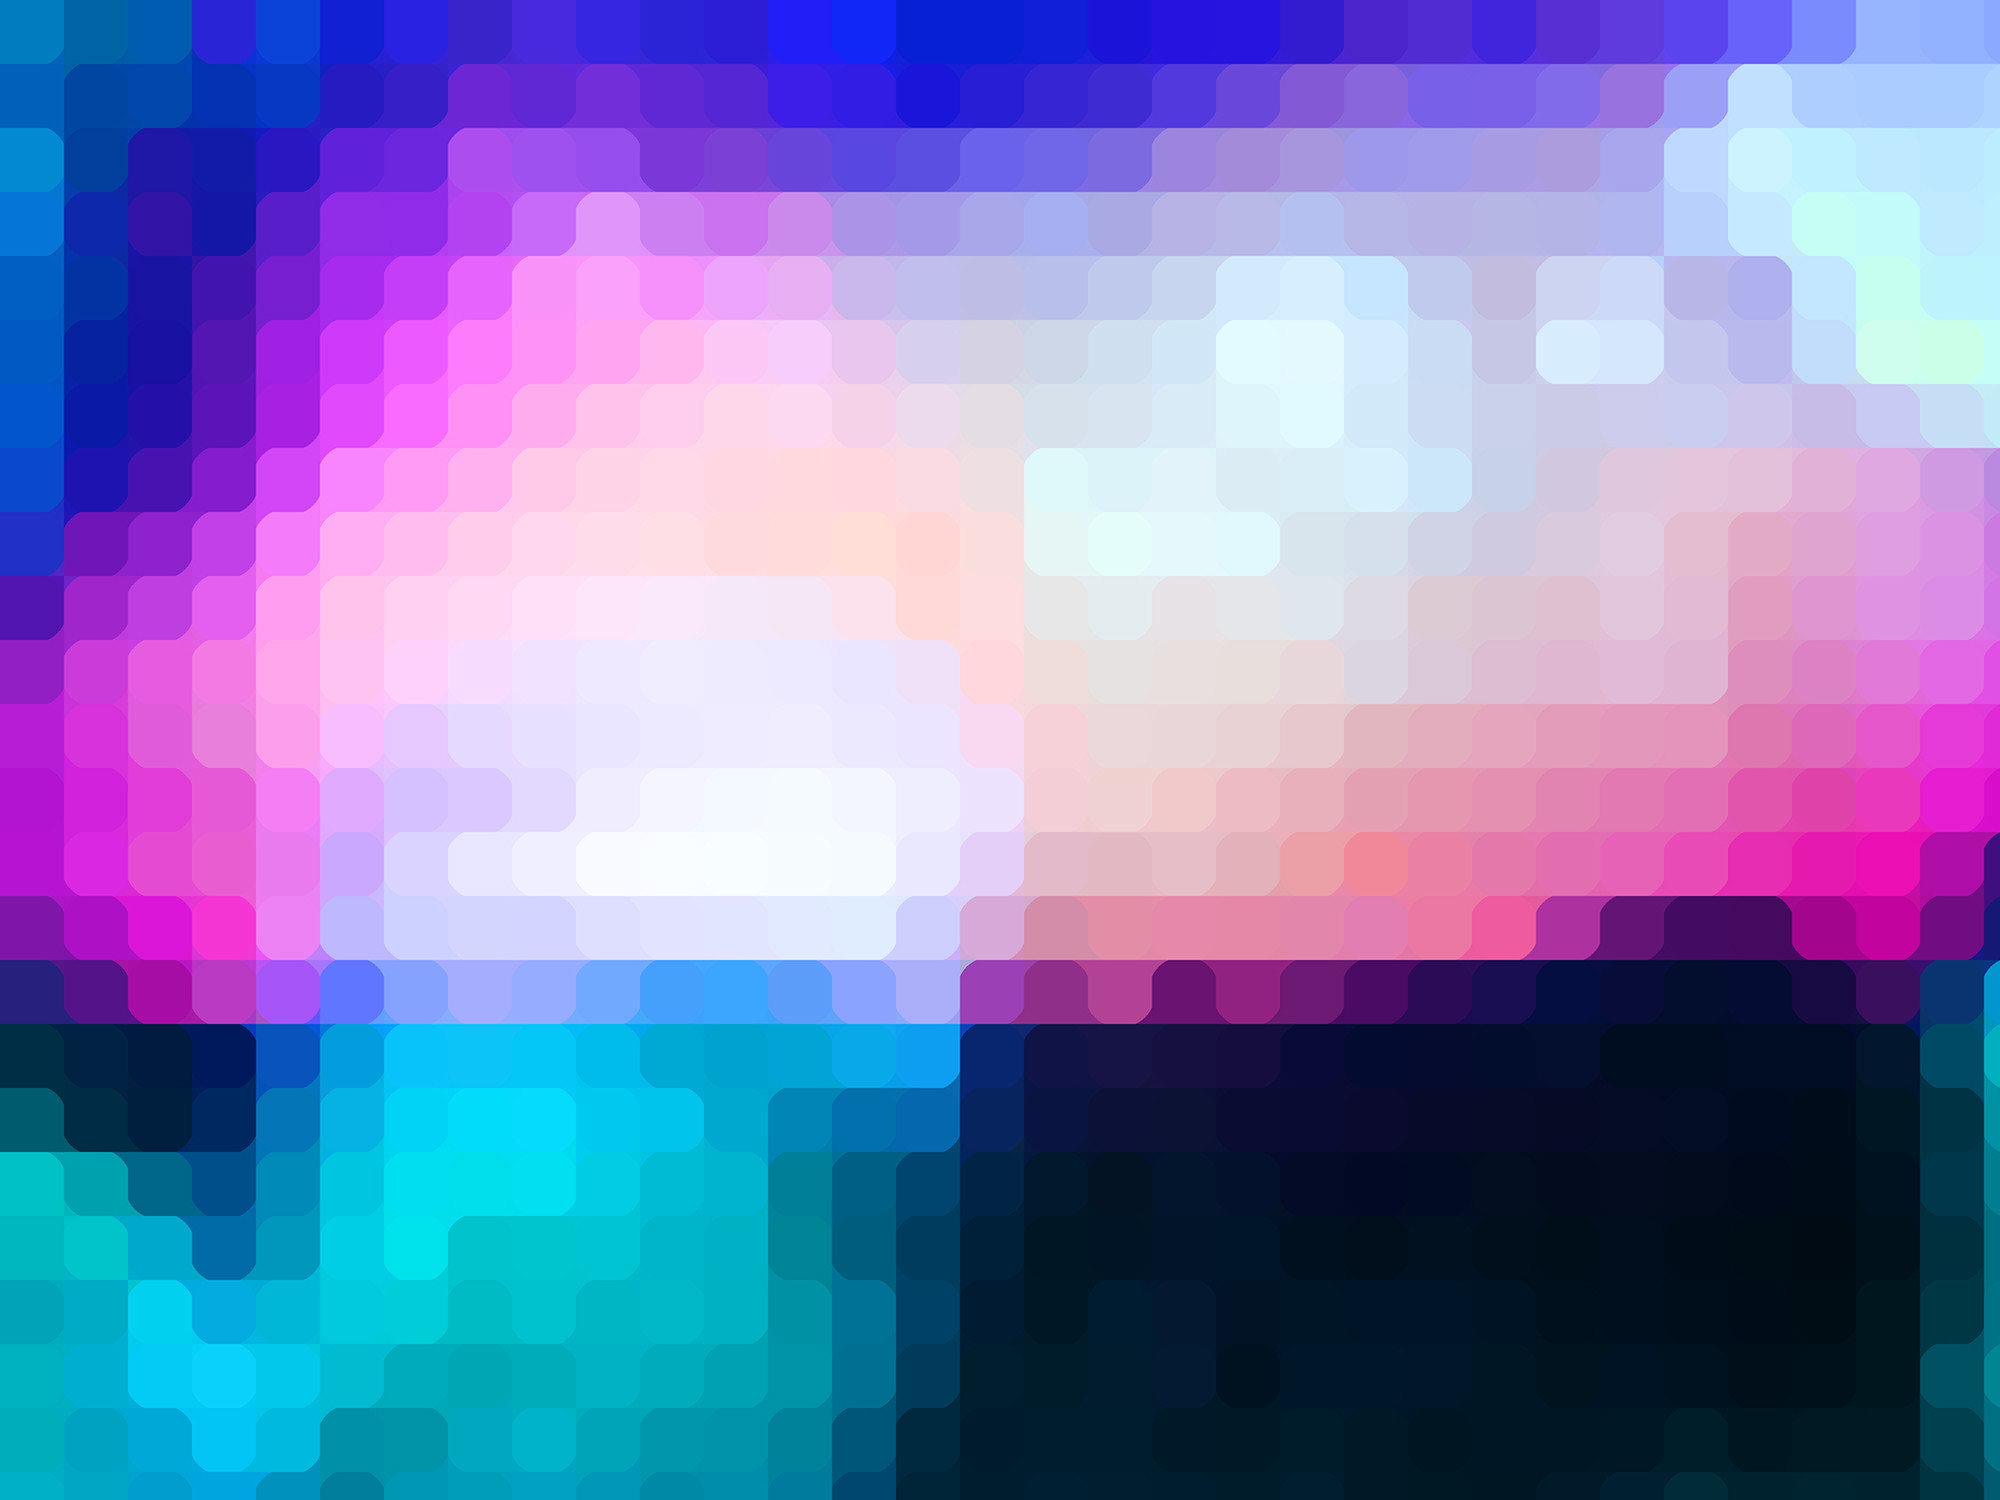 2000x1500 Free High Resolution Pixelated Background Wallpaper Textures | Ian .